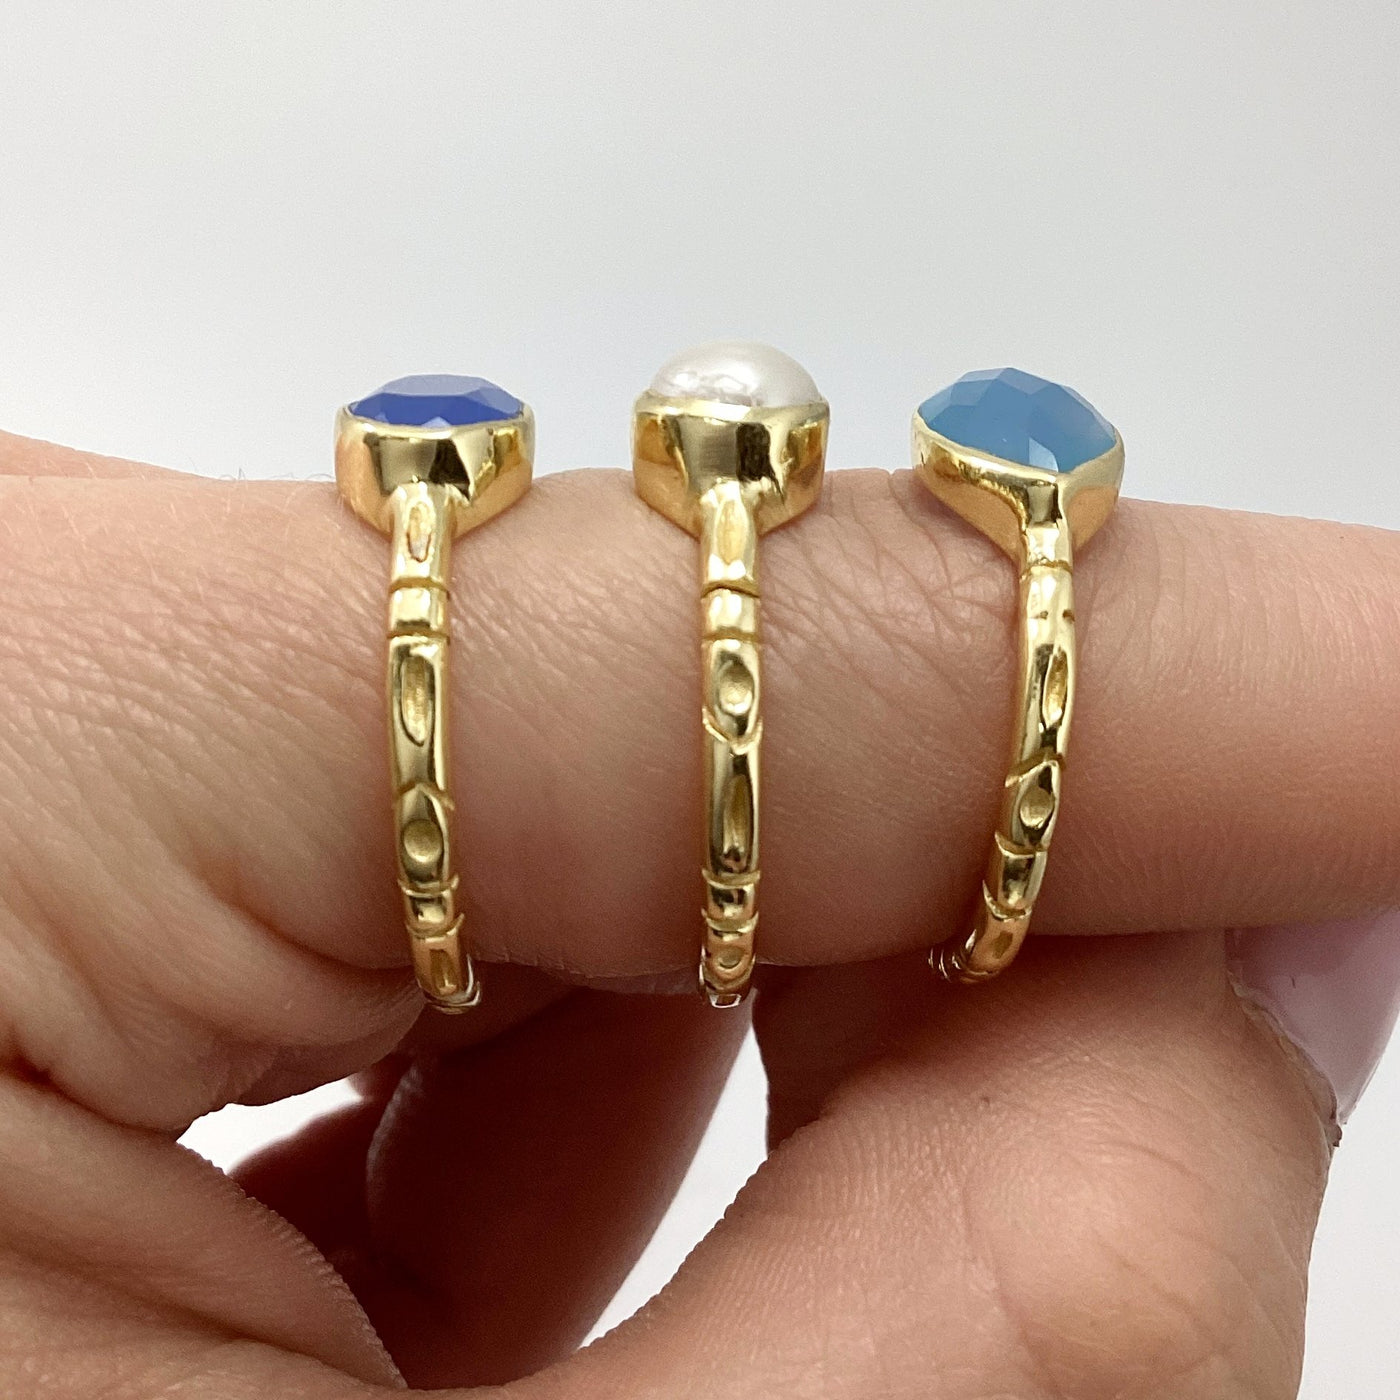 Triple Ring Set - Blue Chalcedony and Pearl